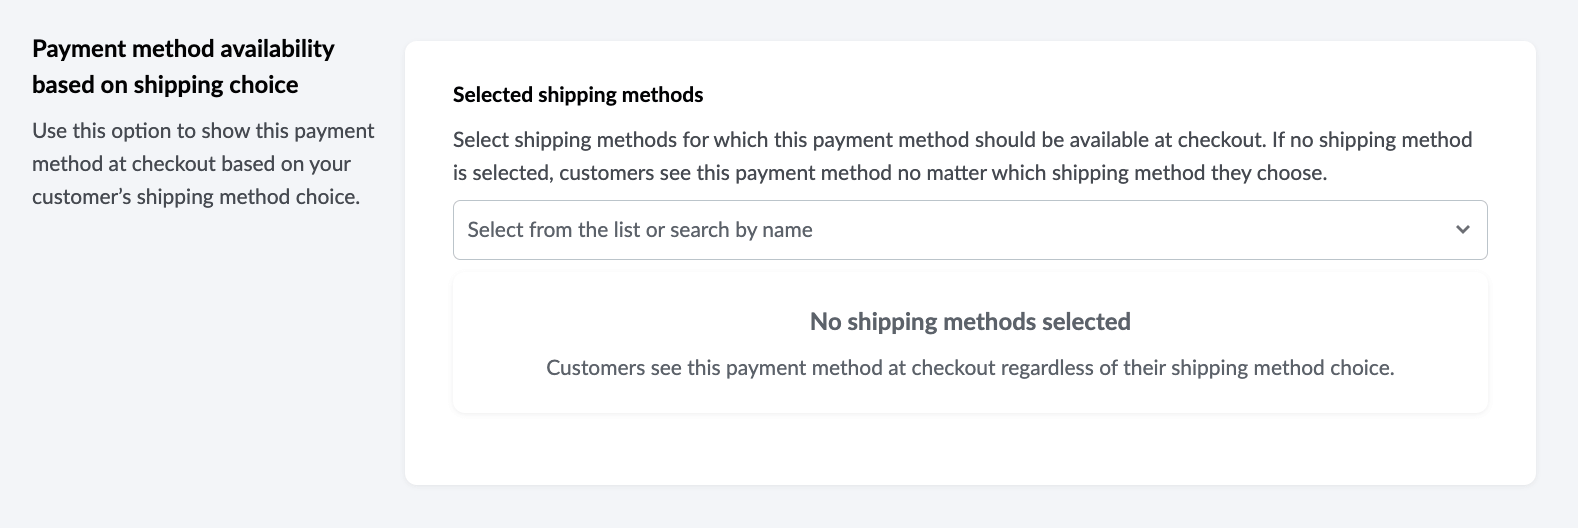 Retail-RE-payment-method-availability.png